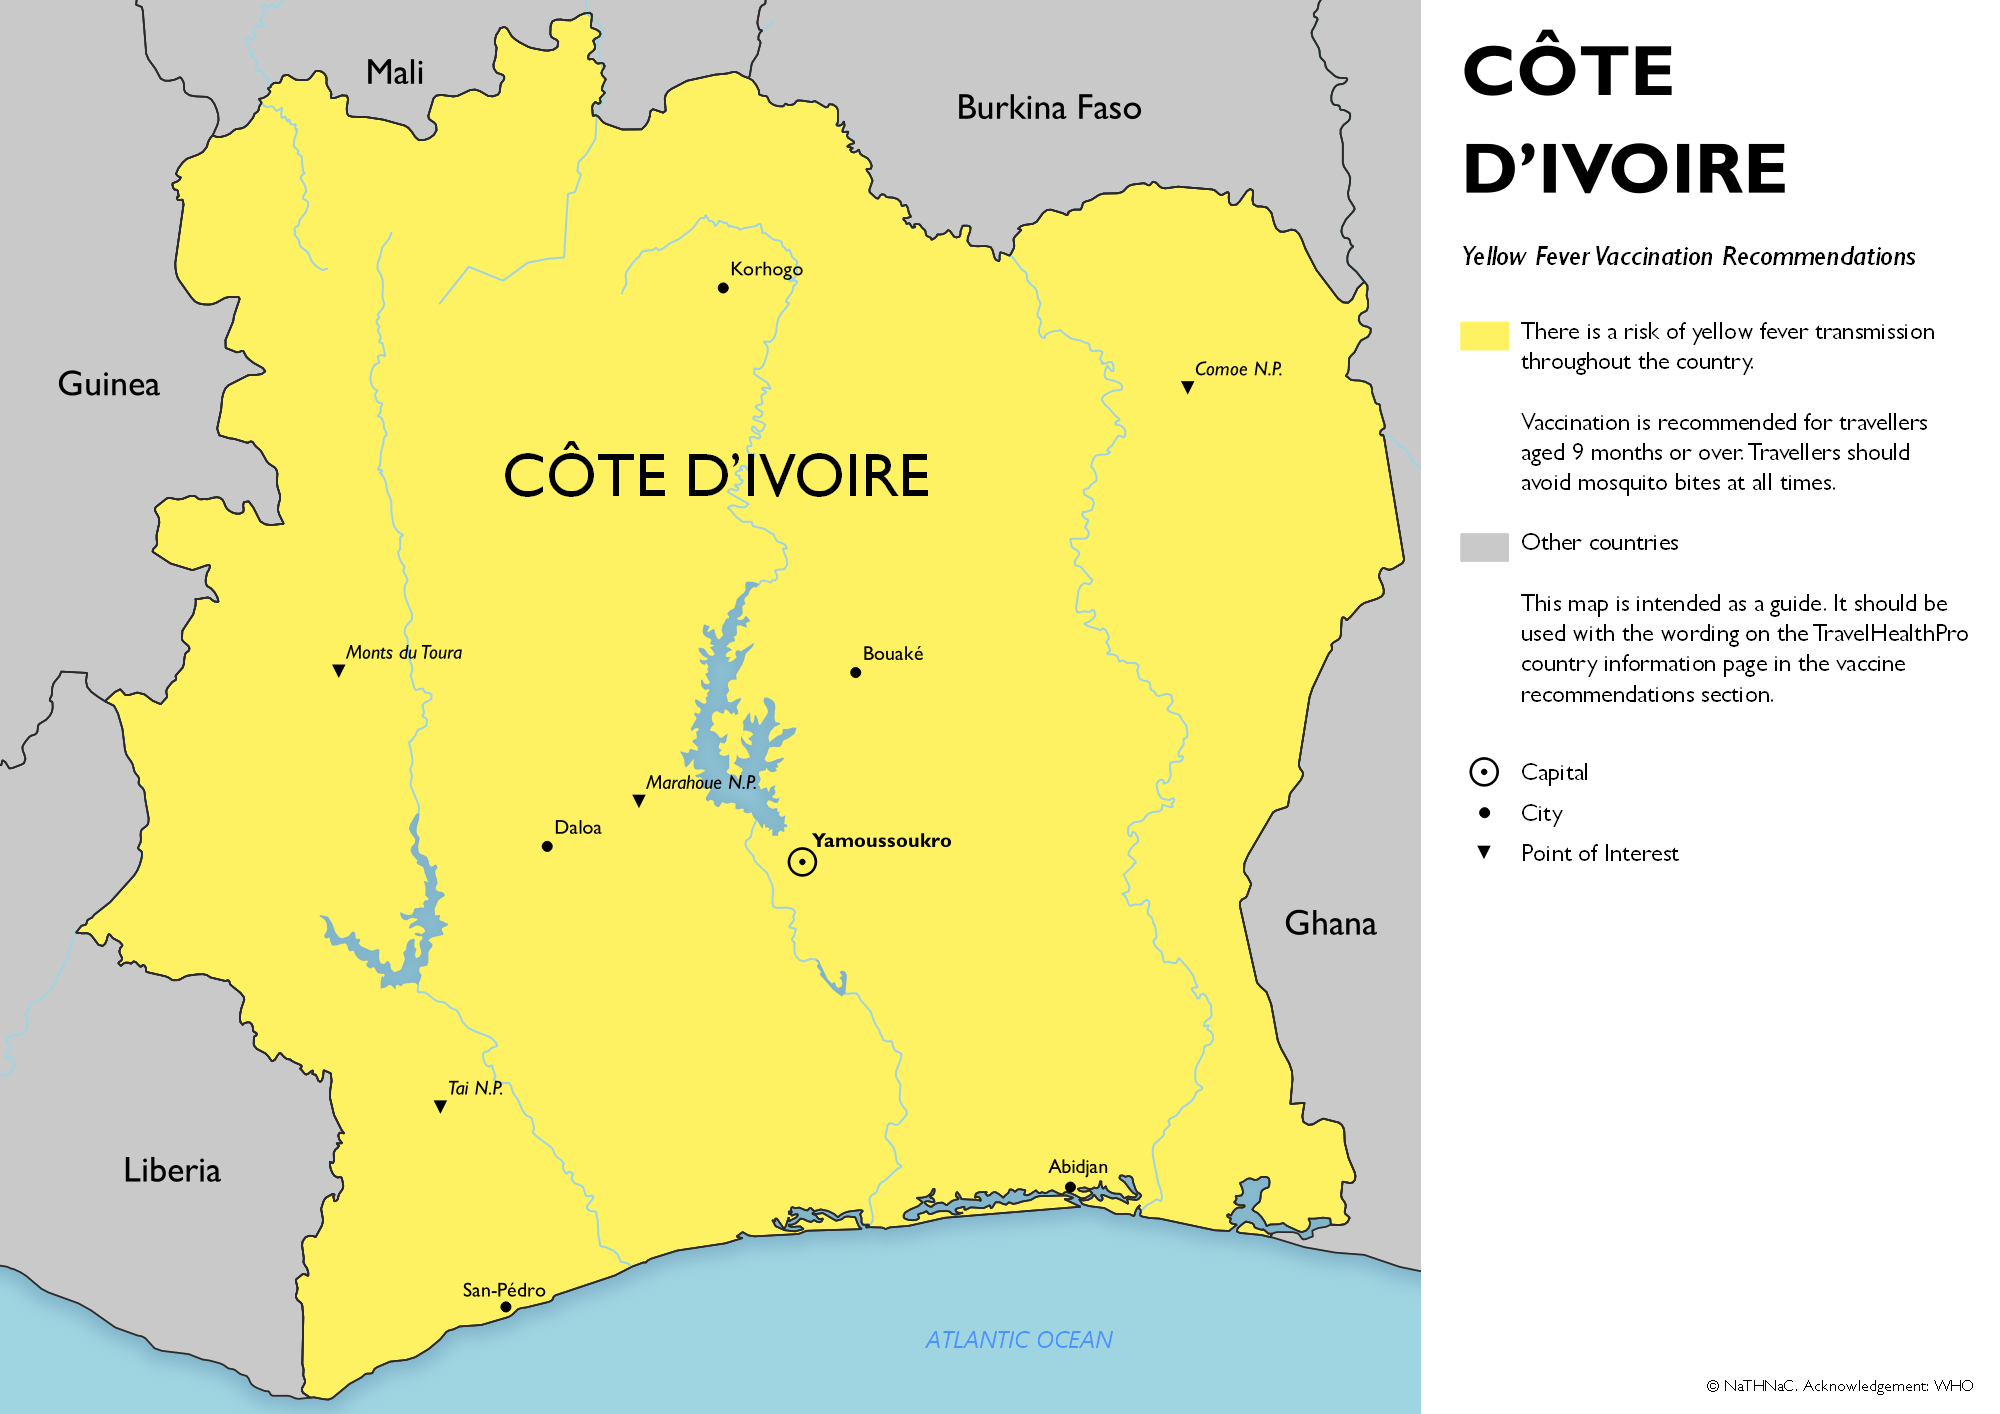 Yellow fever vaccine recommendation map for Cote d'Ivoire